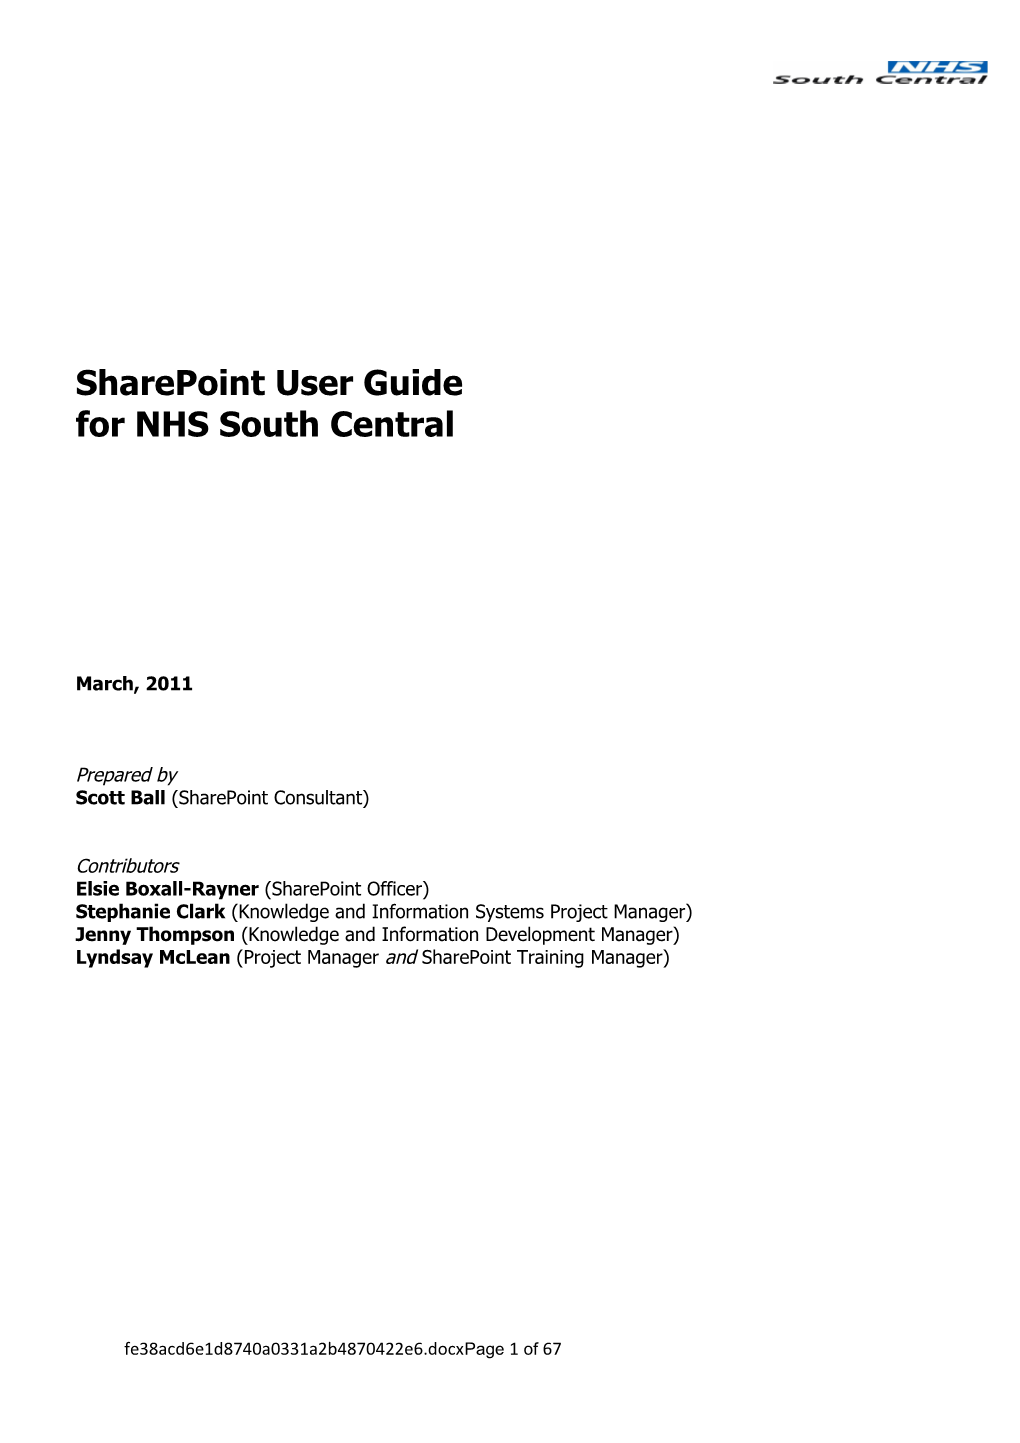 How to Drive Sharepoint - Sharepoint User Guide for South Central